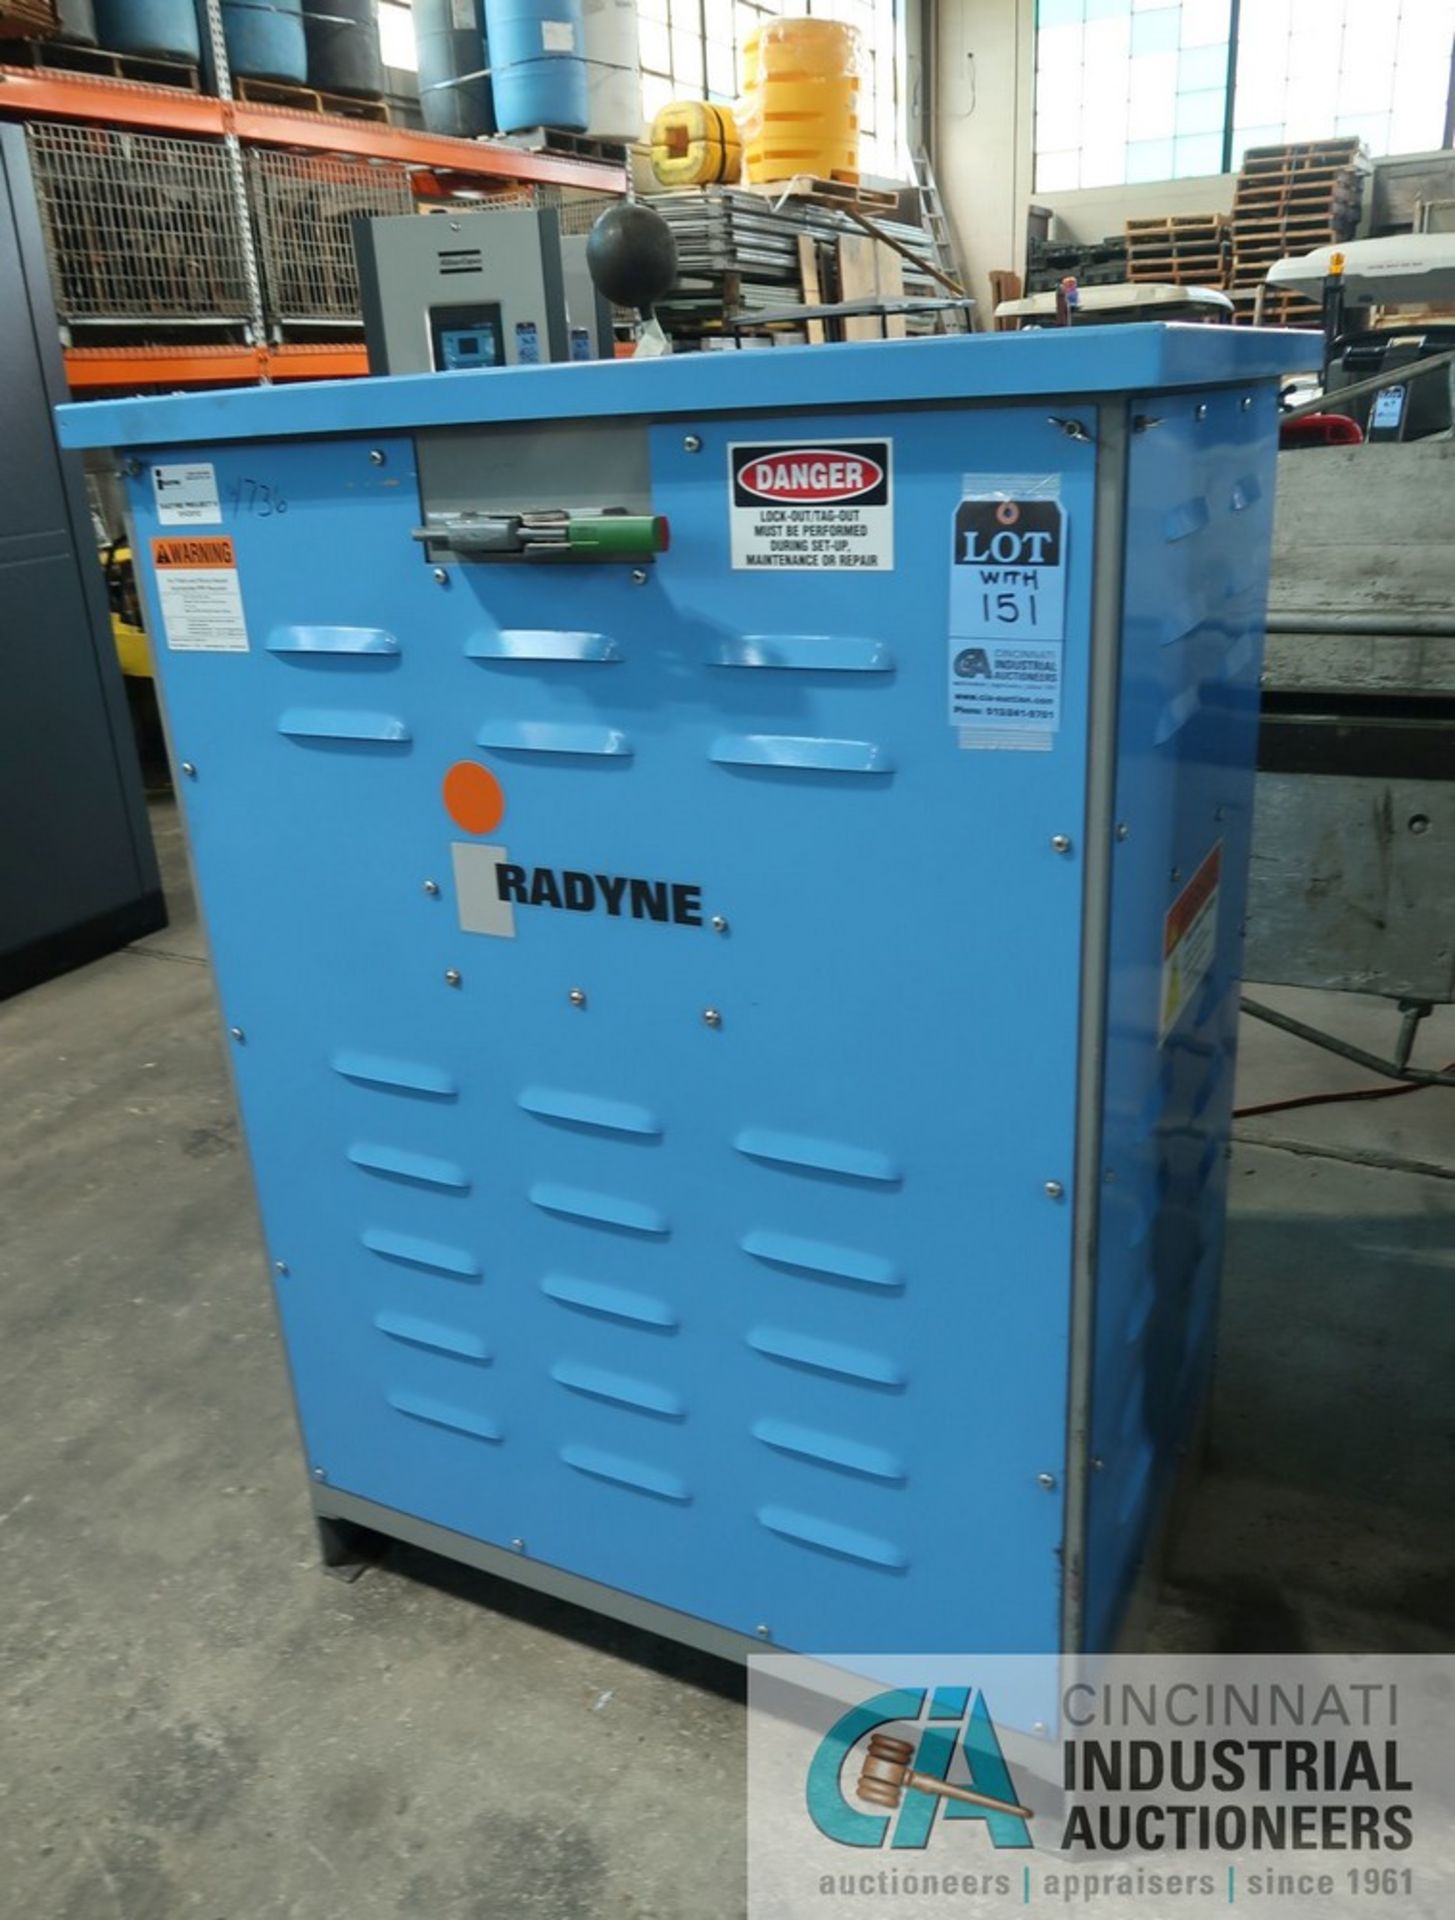 100 KW THERMATOOL RADYNE MODEL CFM3-1006460 INDUCTION HEATER; S/N 2778, 2-STATION HEAT STATION AND - Image 14 of 16